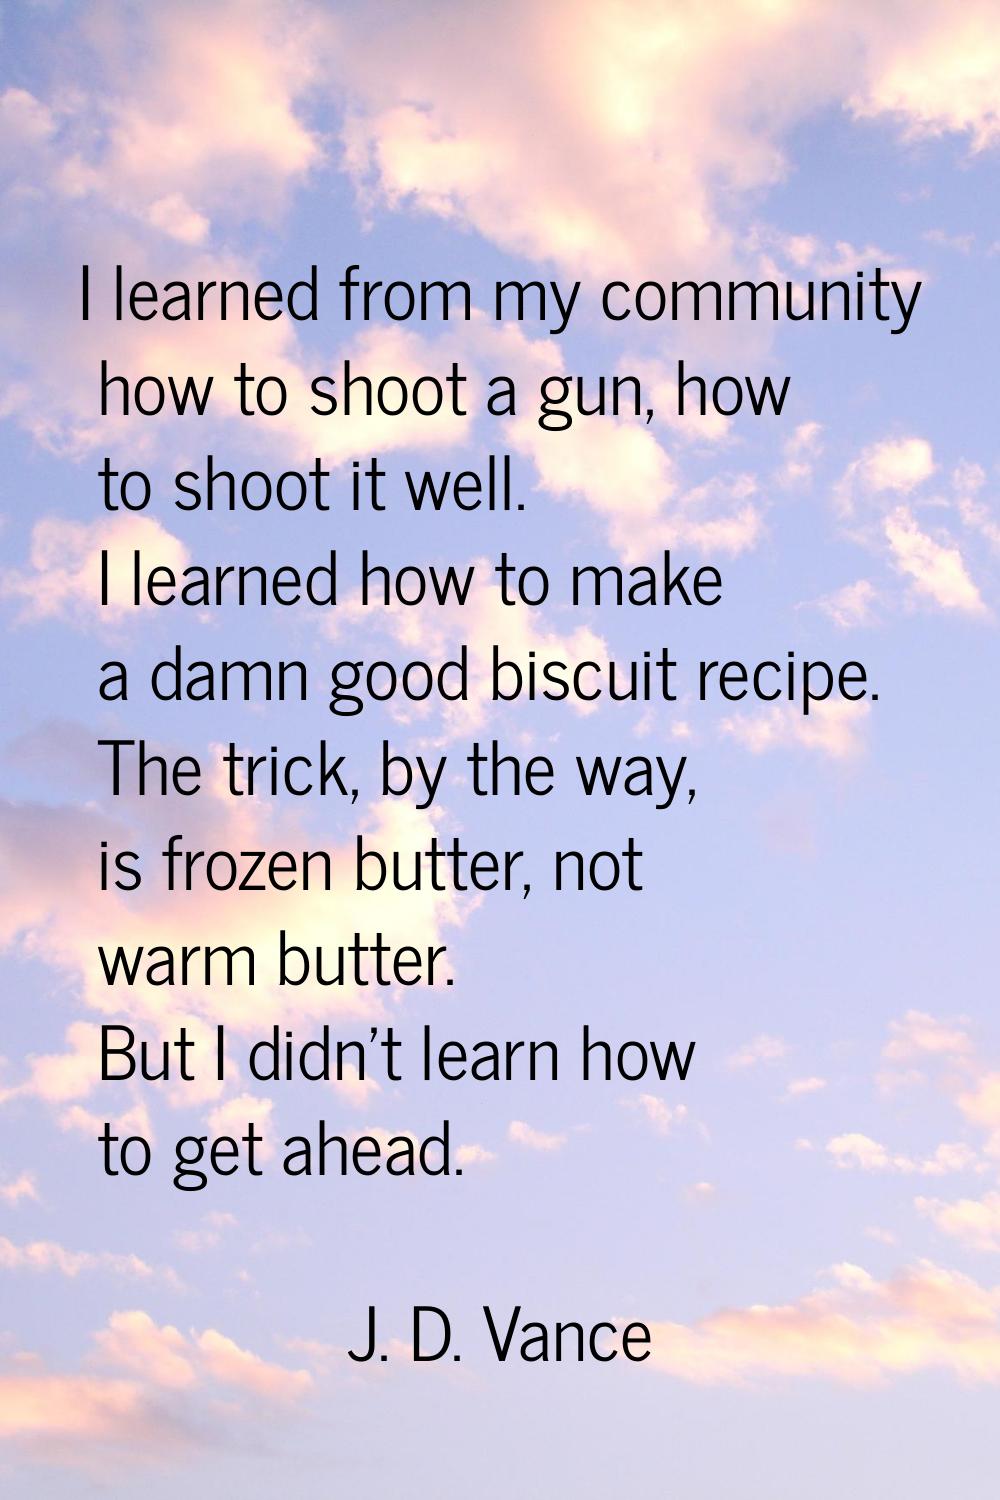 I learned from my community how to shoot a gun, how to shoot it well. I learned how to make a damn 